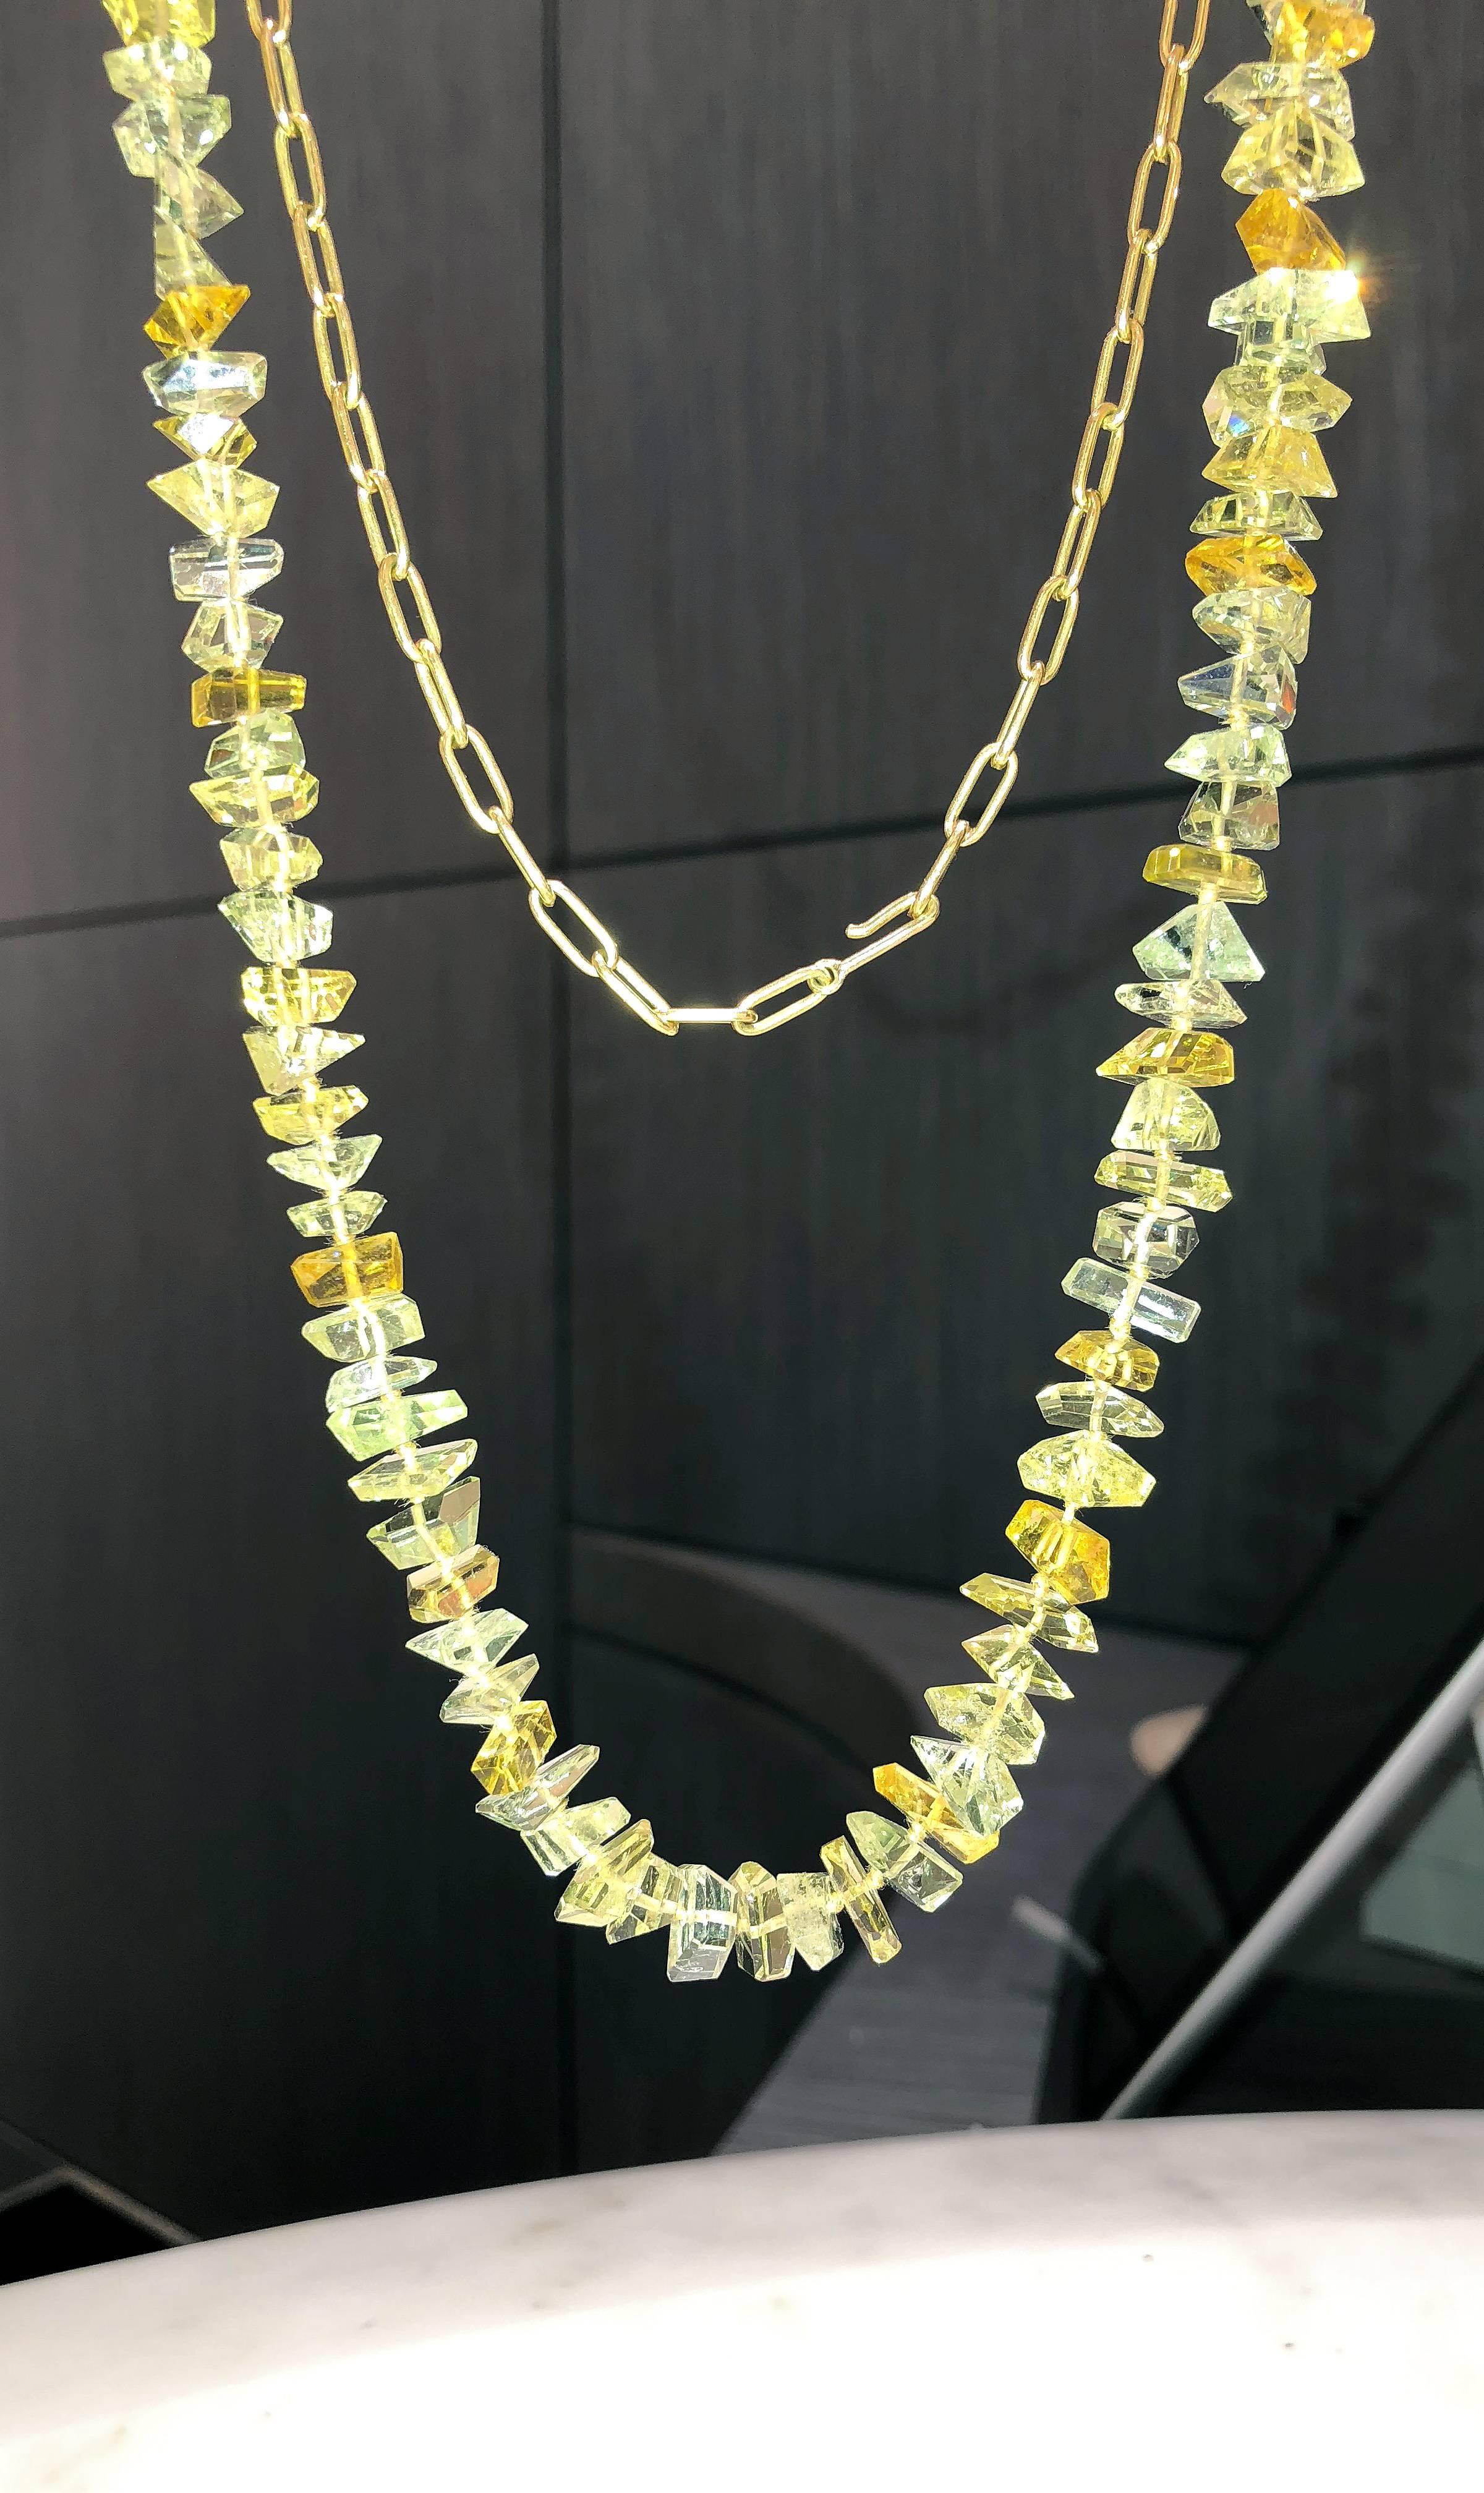 One of a Kind Free Facets Long Necklace handcrafted by renowned jewelry artist Geoffrey Good showcasing a spectacular array of exceptionally faceted and polished heliodor beryl gemstones strung on silk cord and attached to a handmade matte-finished